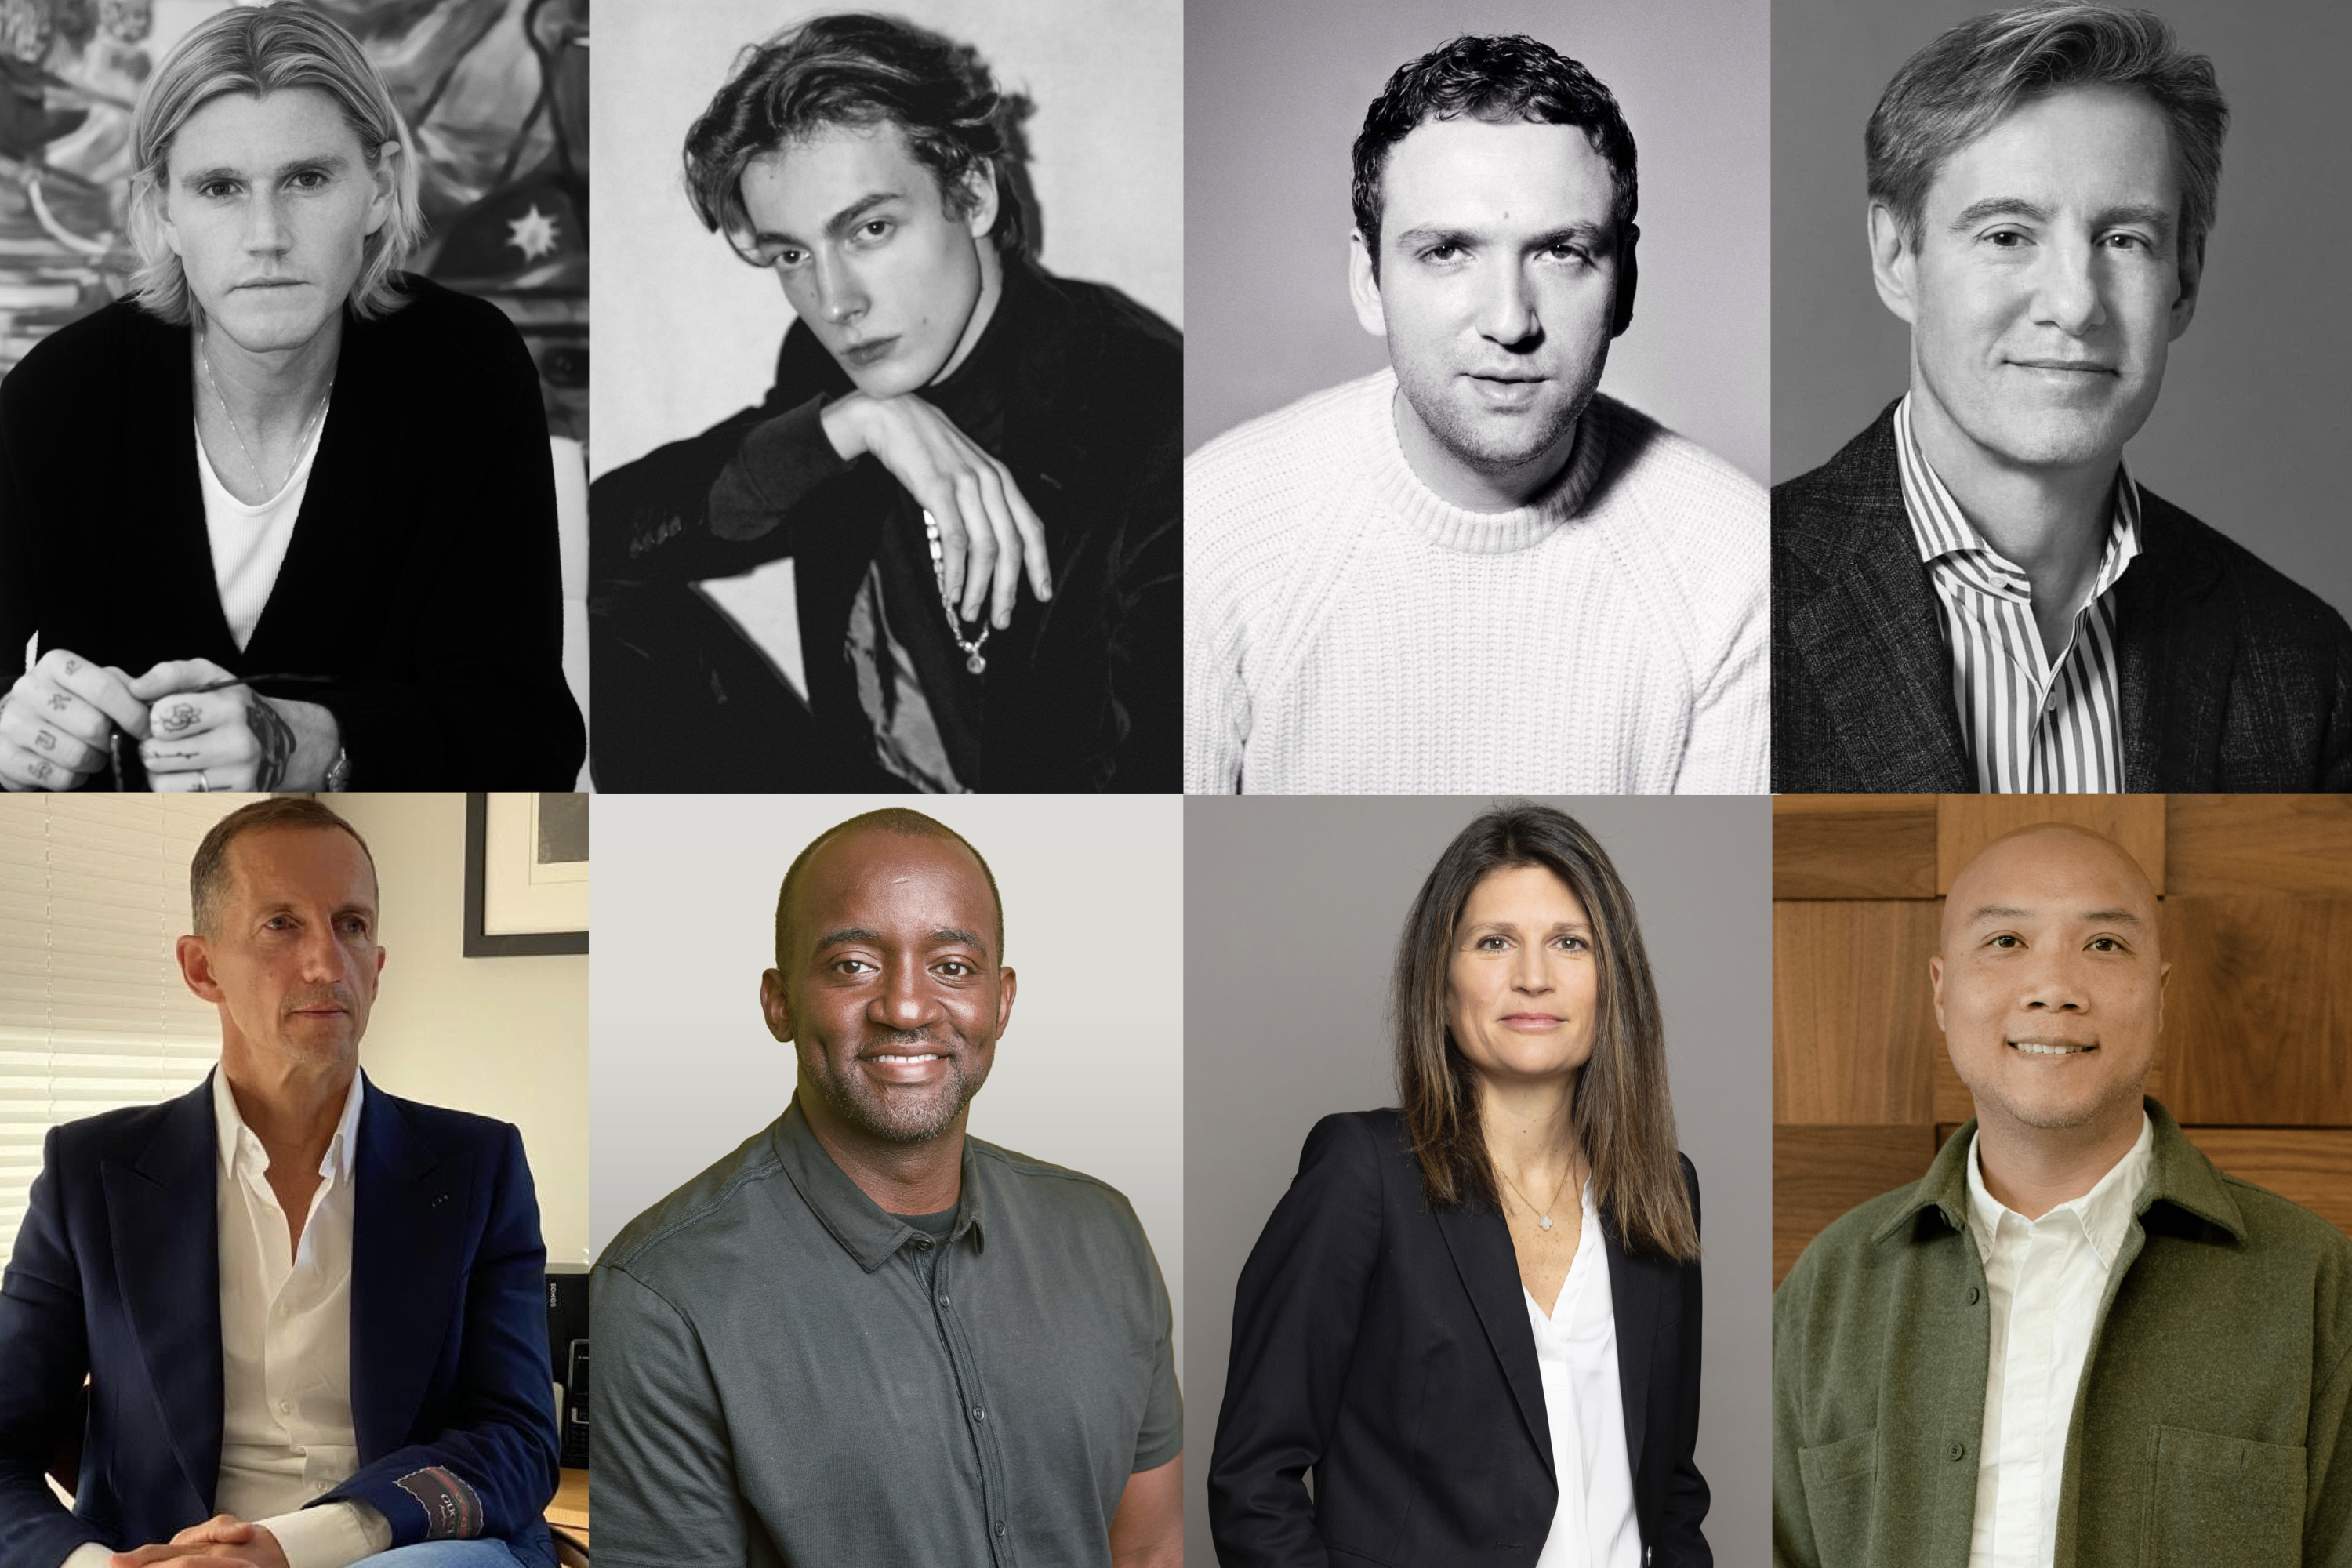 Go behind-the scenes and meet the LVMH Prize 2023 finalists